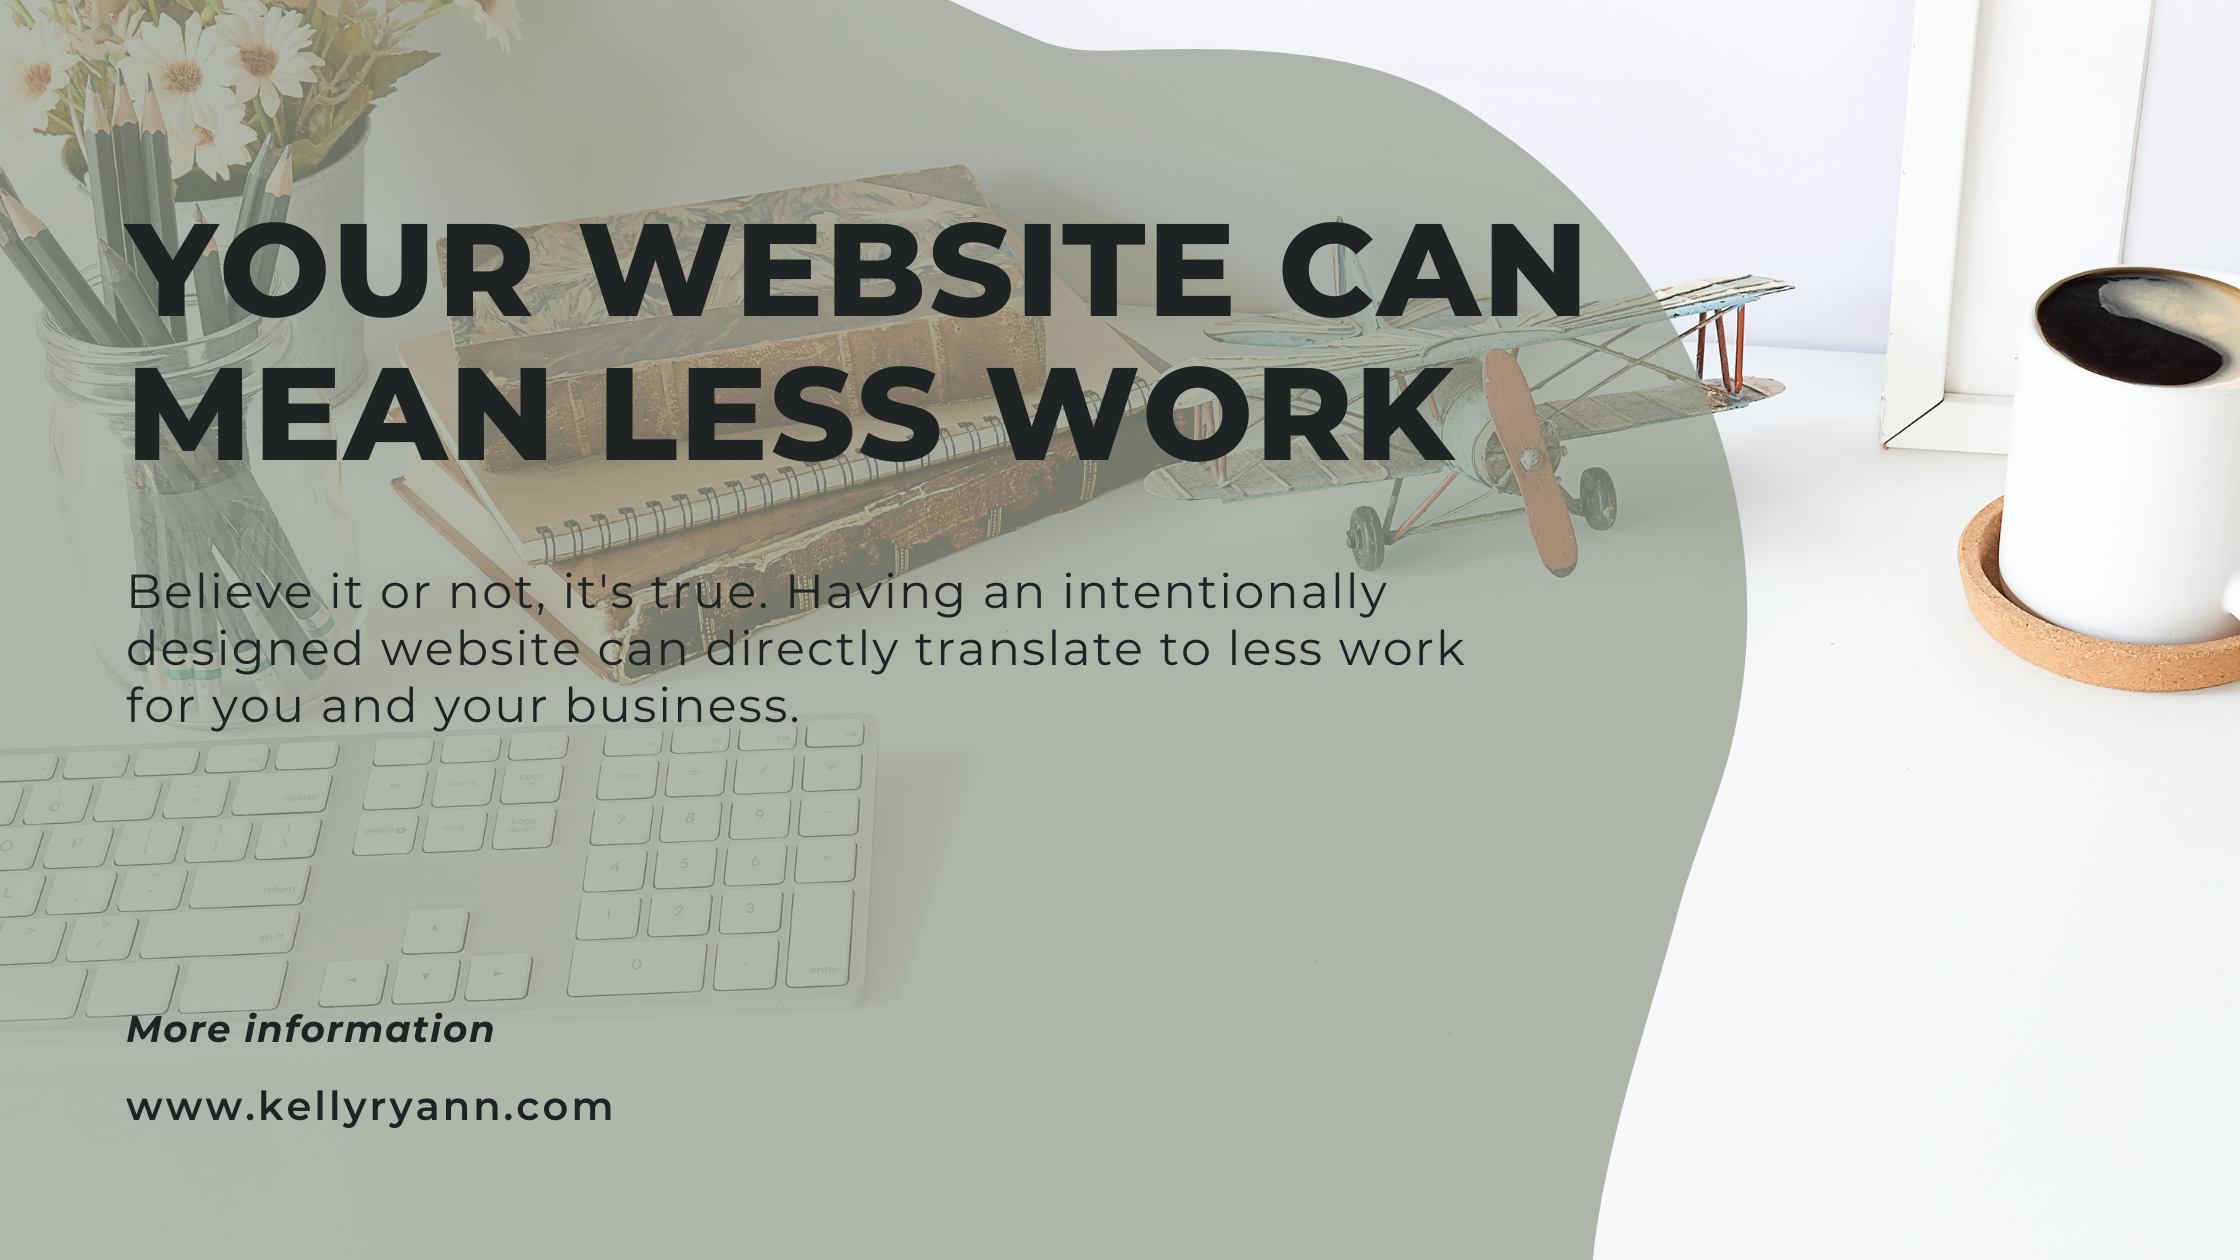 Your website can mean less work